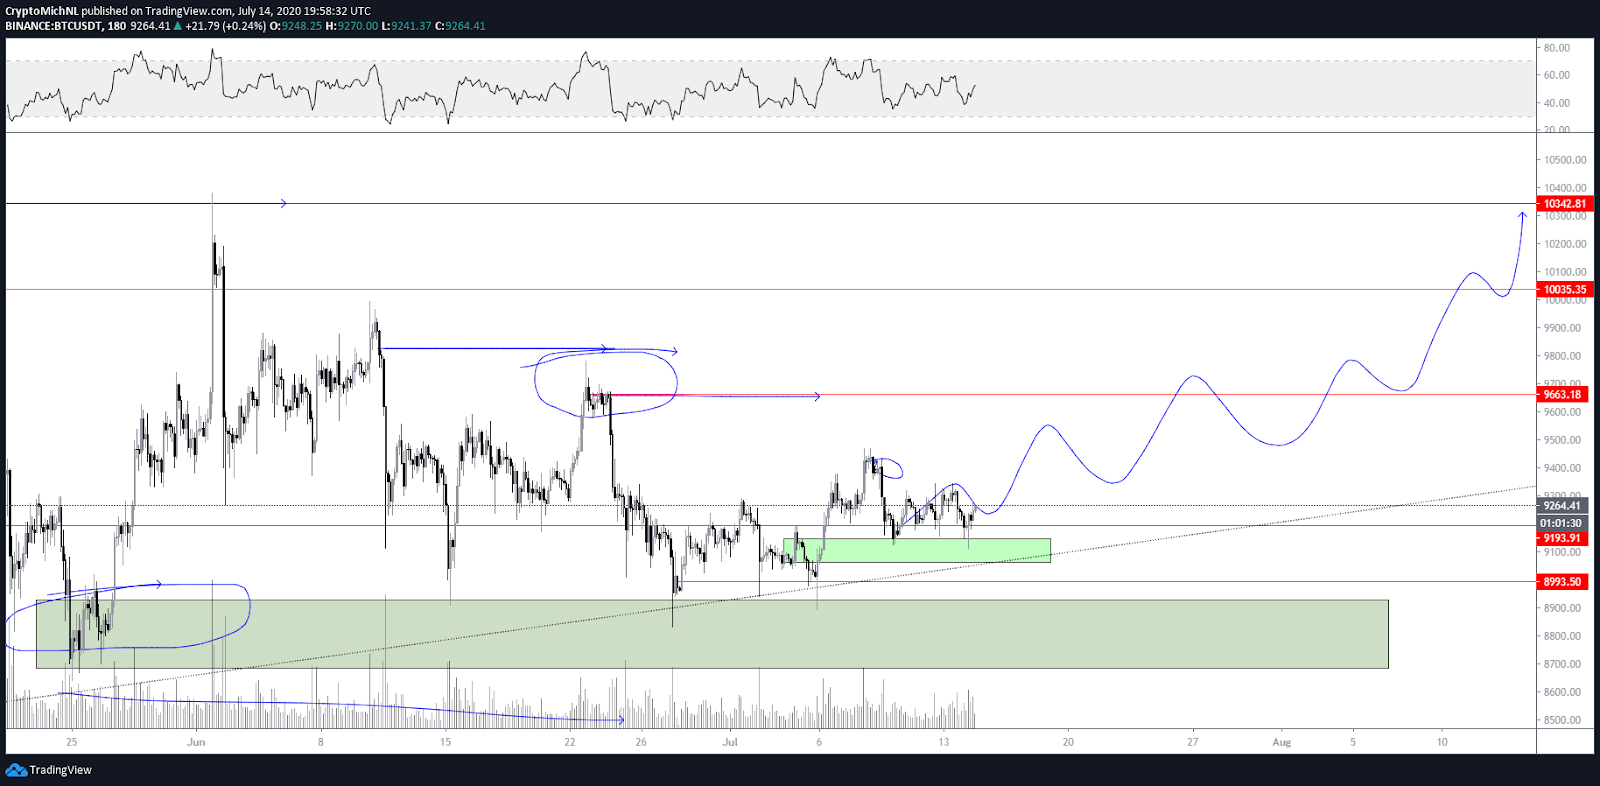 The price chart of Bitcoin with a potential fractal upwards